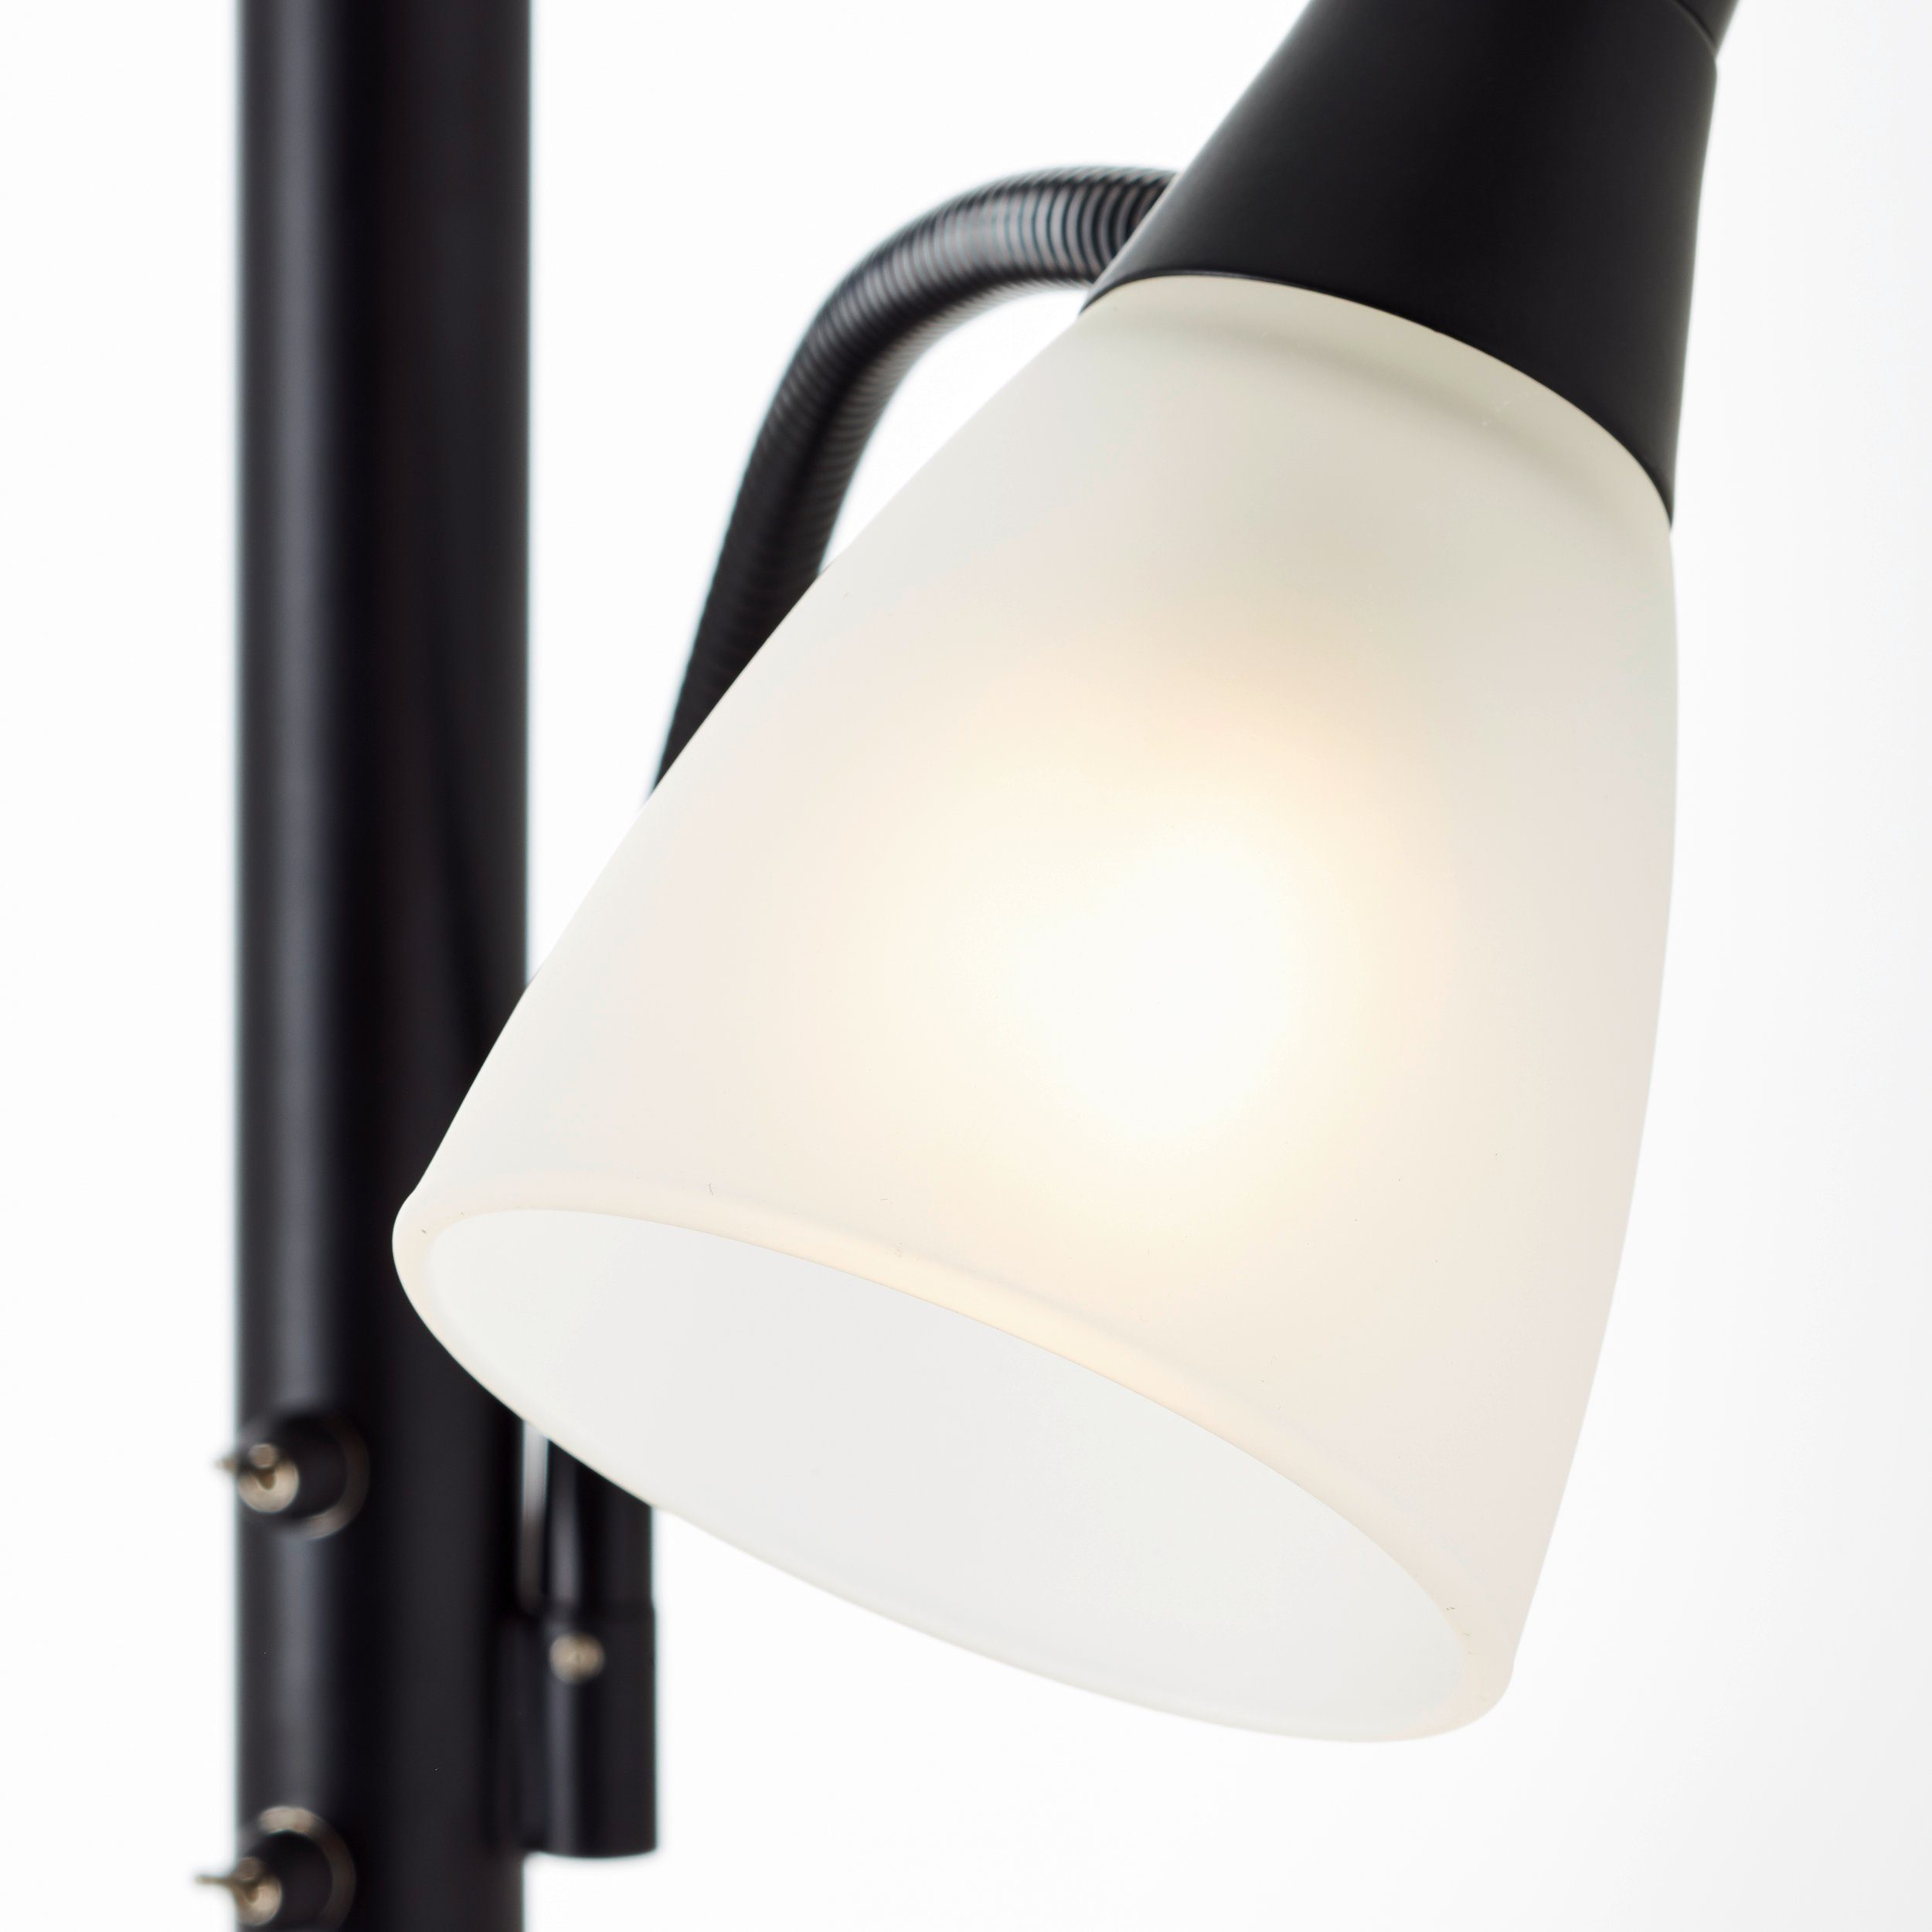 Brilliant Stehlampe W Lesearm schwarz, E27, Lucy LED 5 1x A60, Metall/Glas, Deckenfluter Lucy